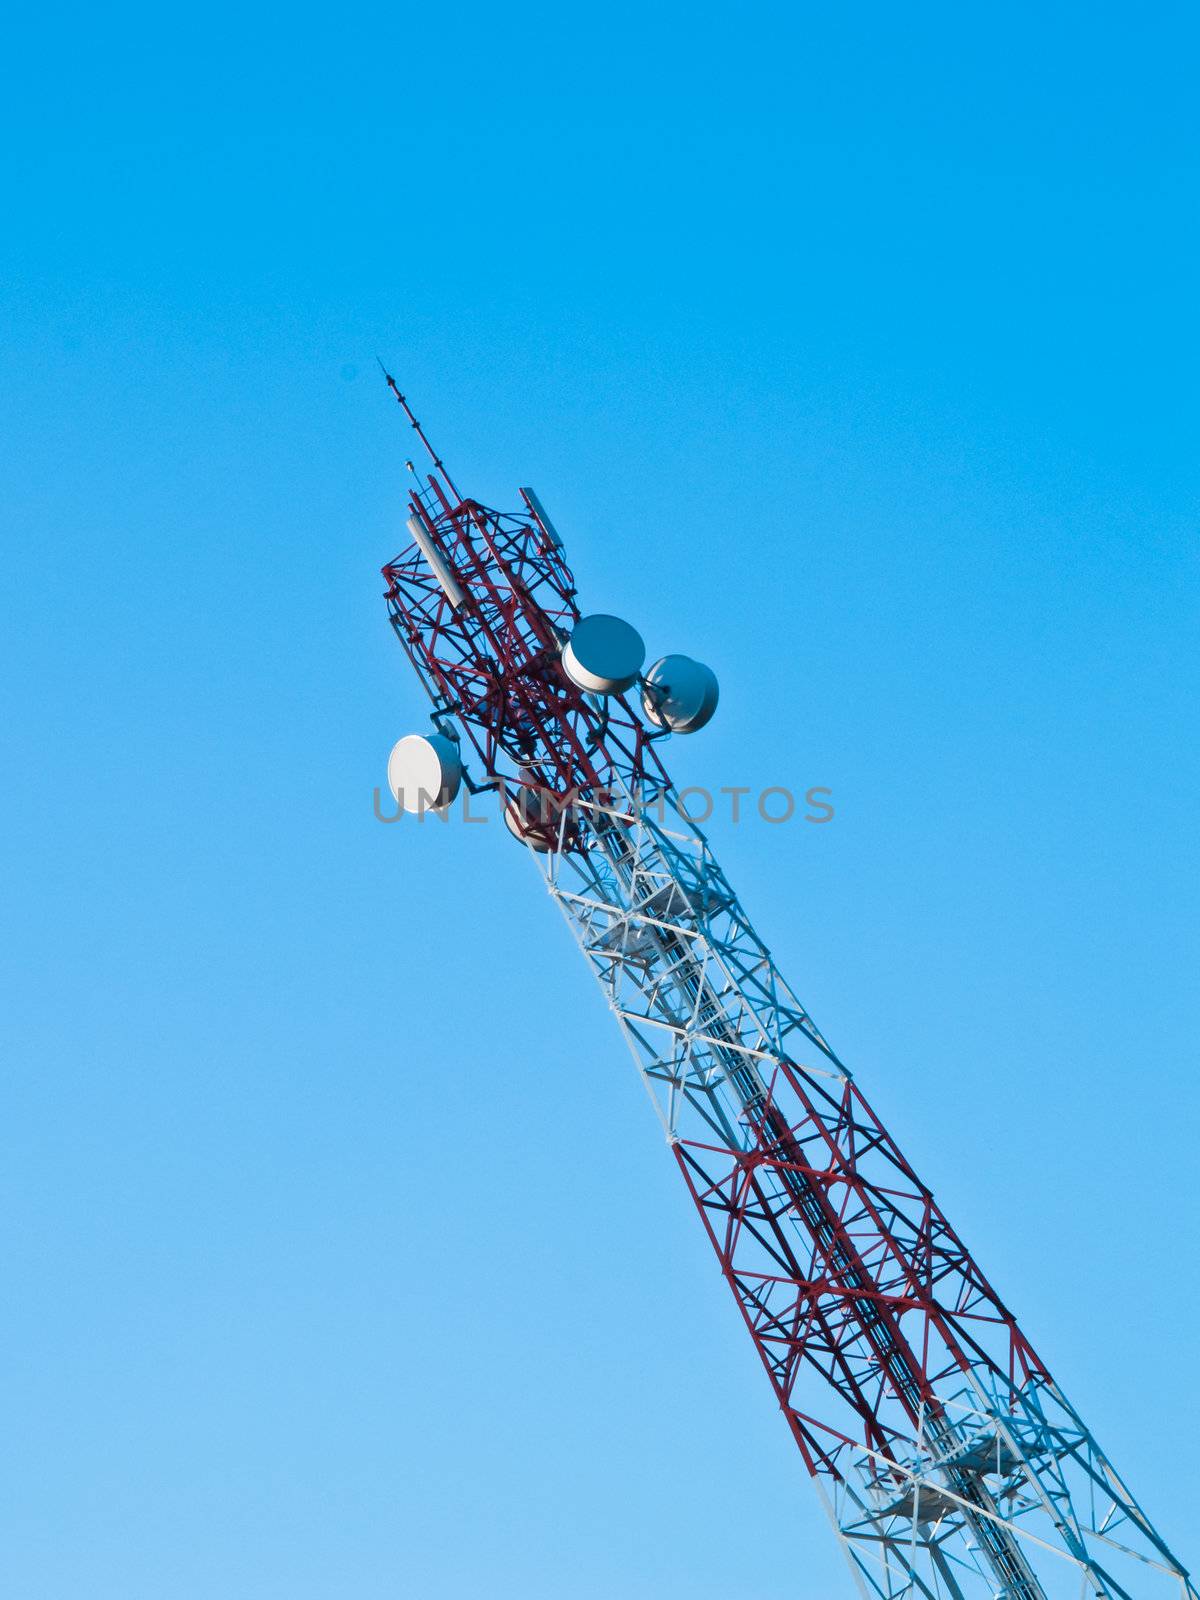 Mobile phone communication repeater antenna tower in blue sky